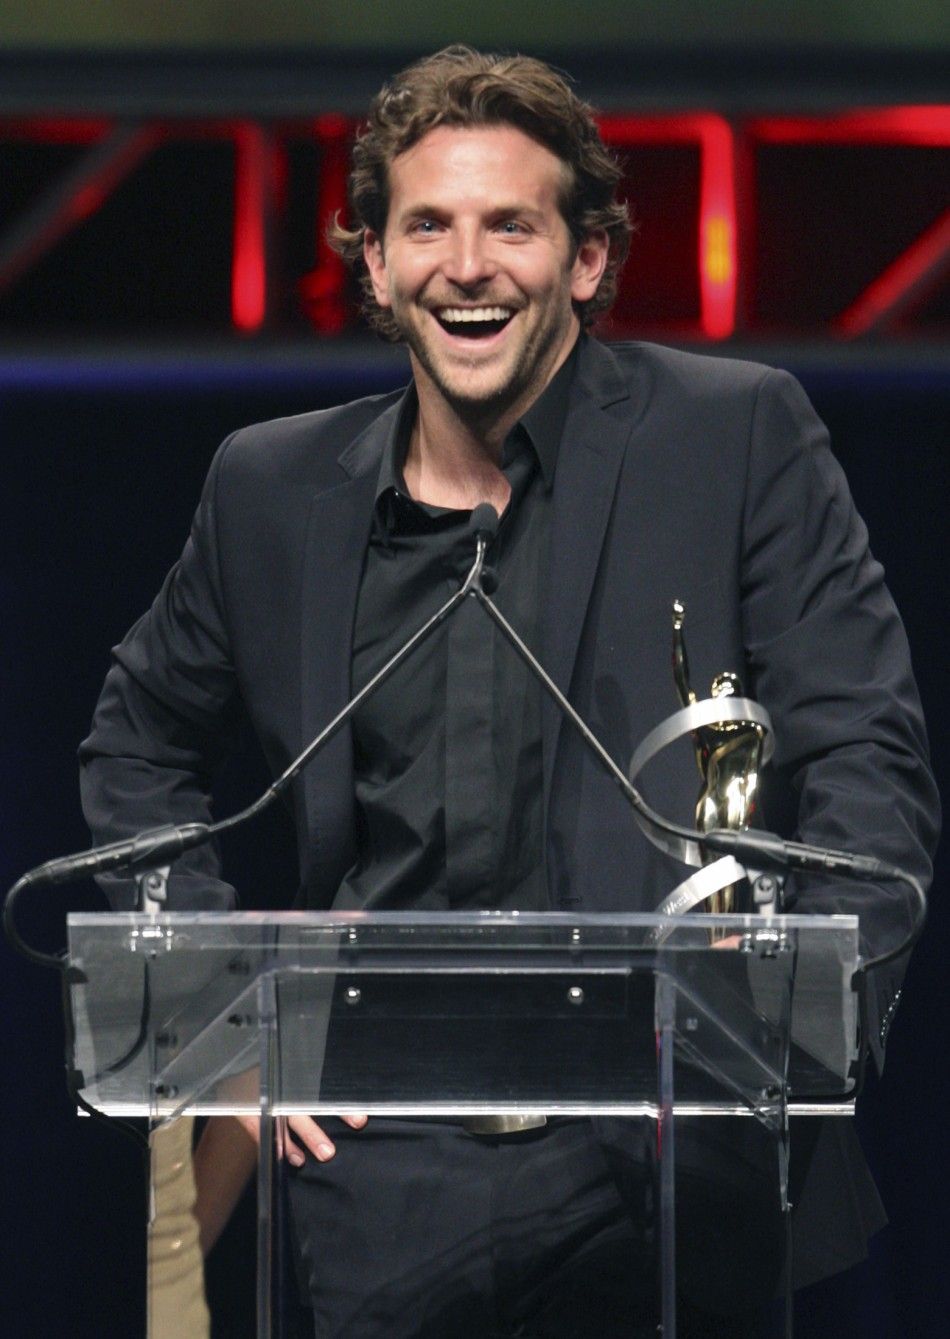 Cooper accepts his award during the ShoWest Award show at the Paris Las Vegas resort in Las Vegas